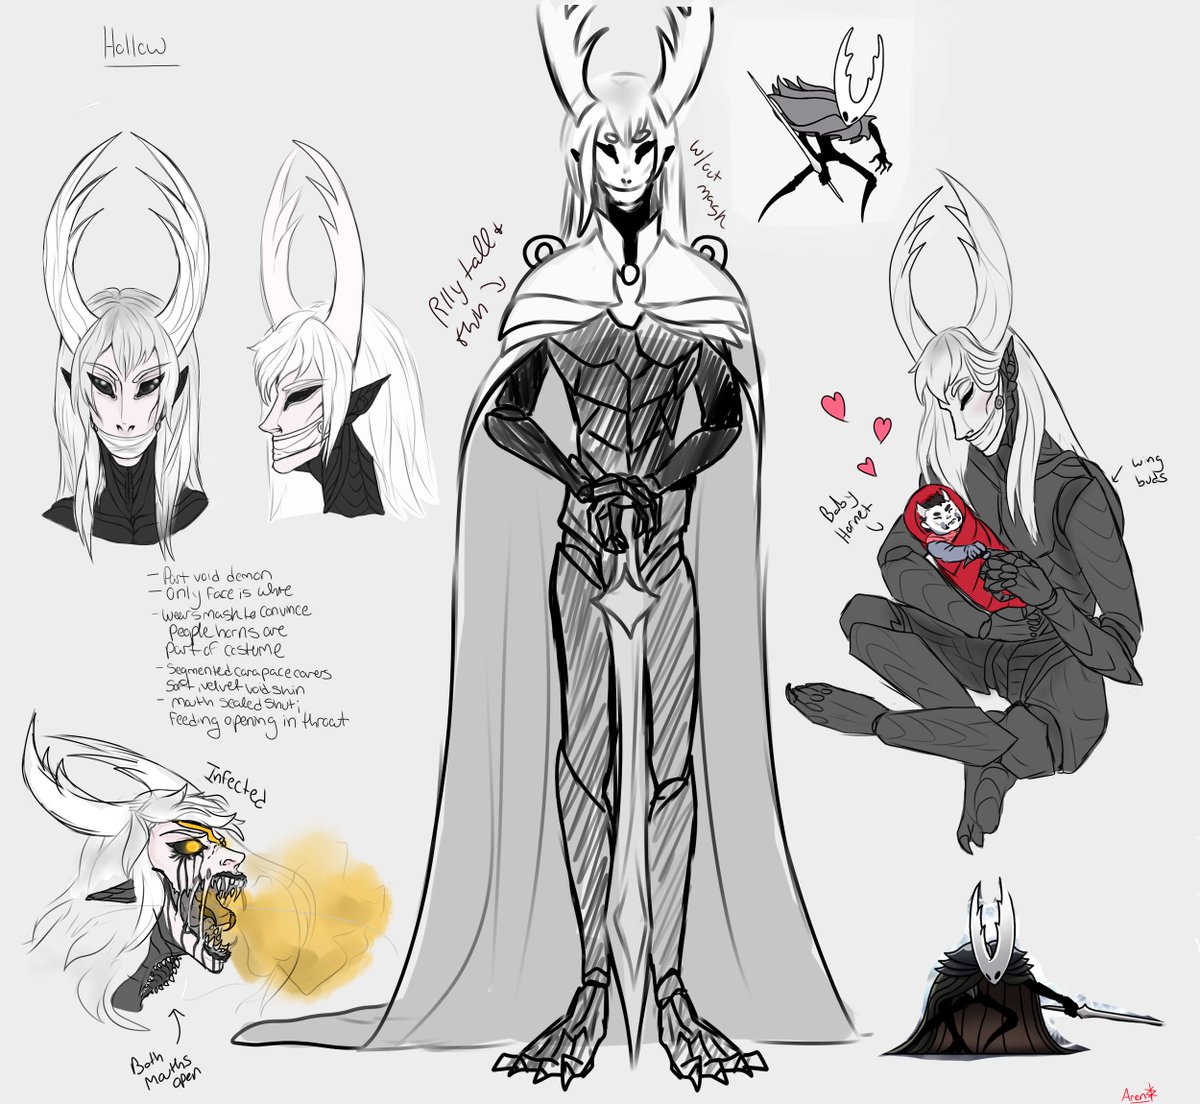 Hollow Knight so here's the best vessel as some sort of human-adjacent...